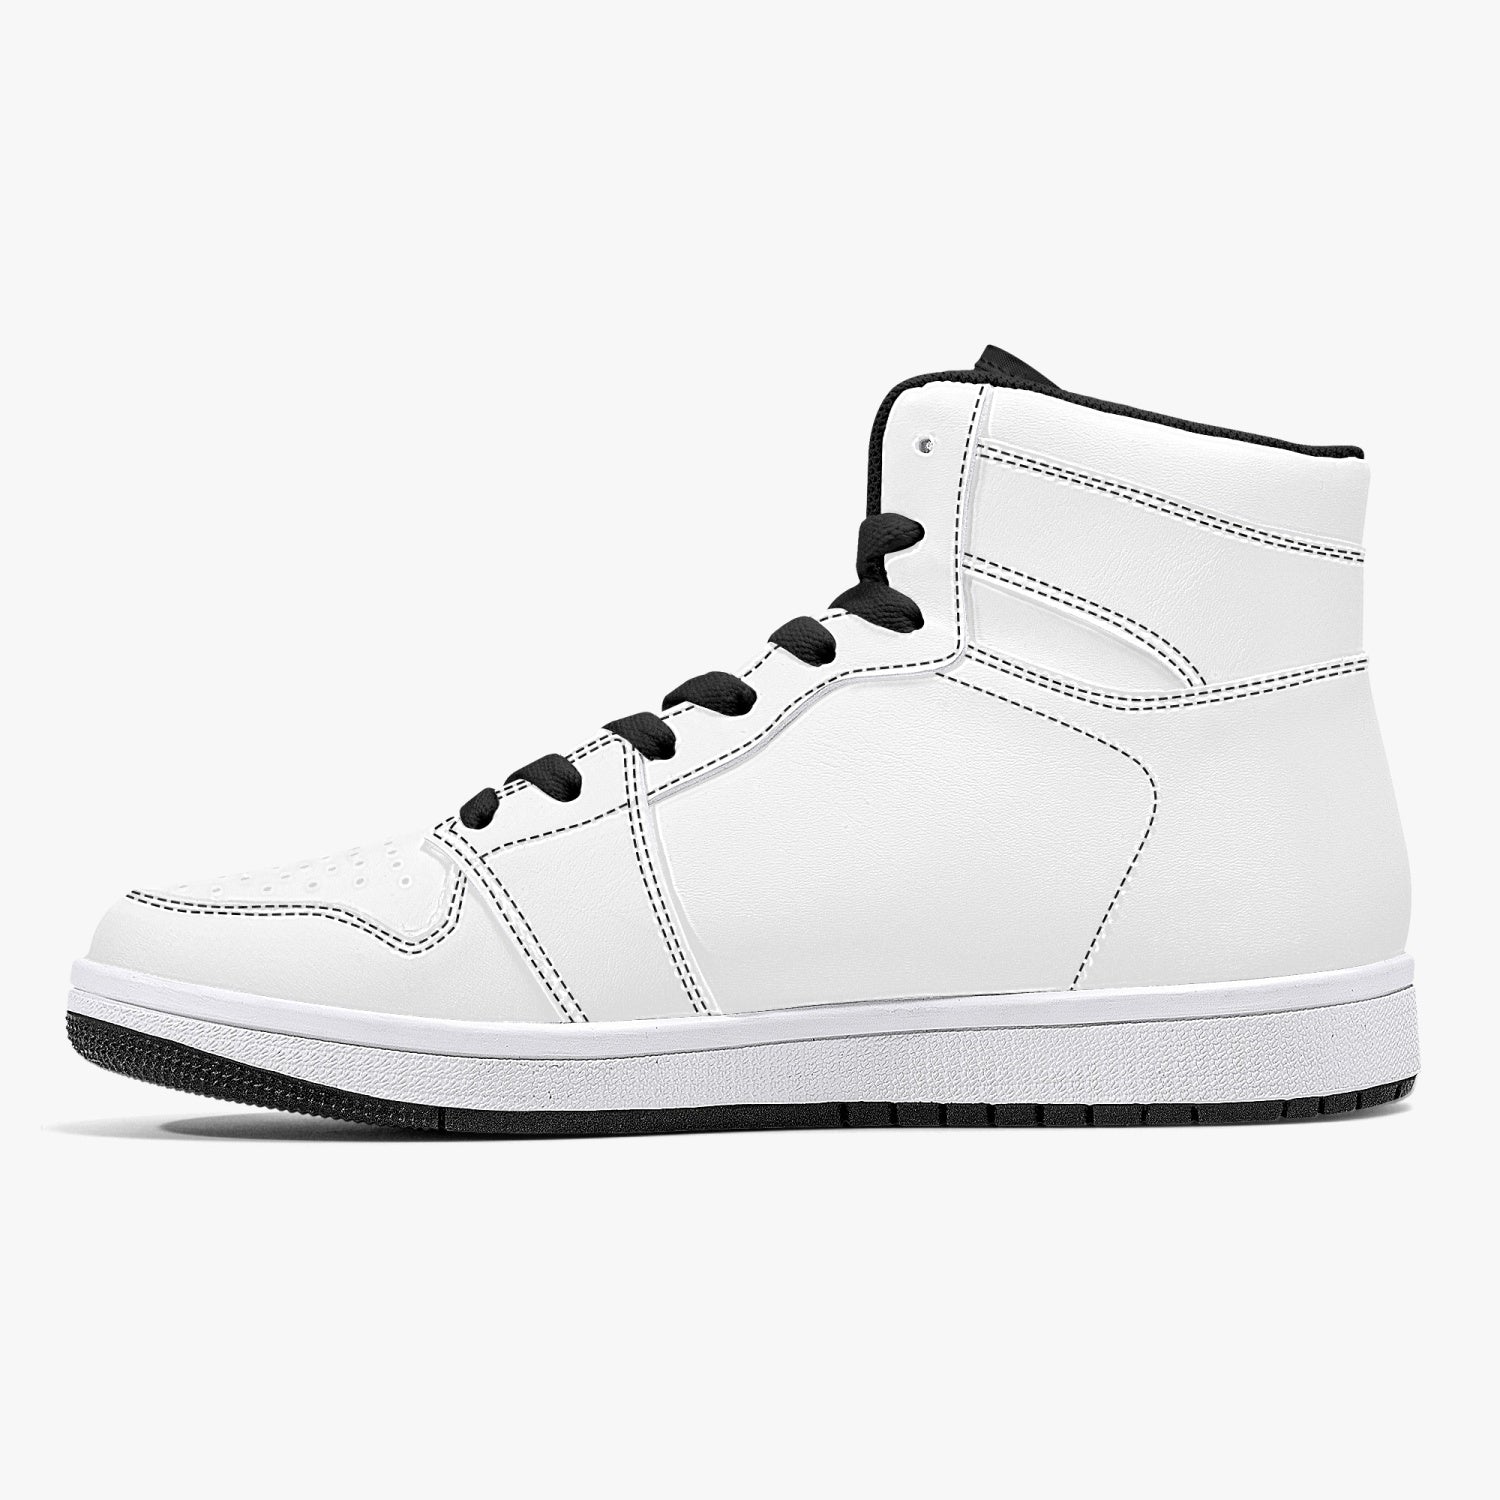 smom High-Top Leather Sneakers - White / Black